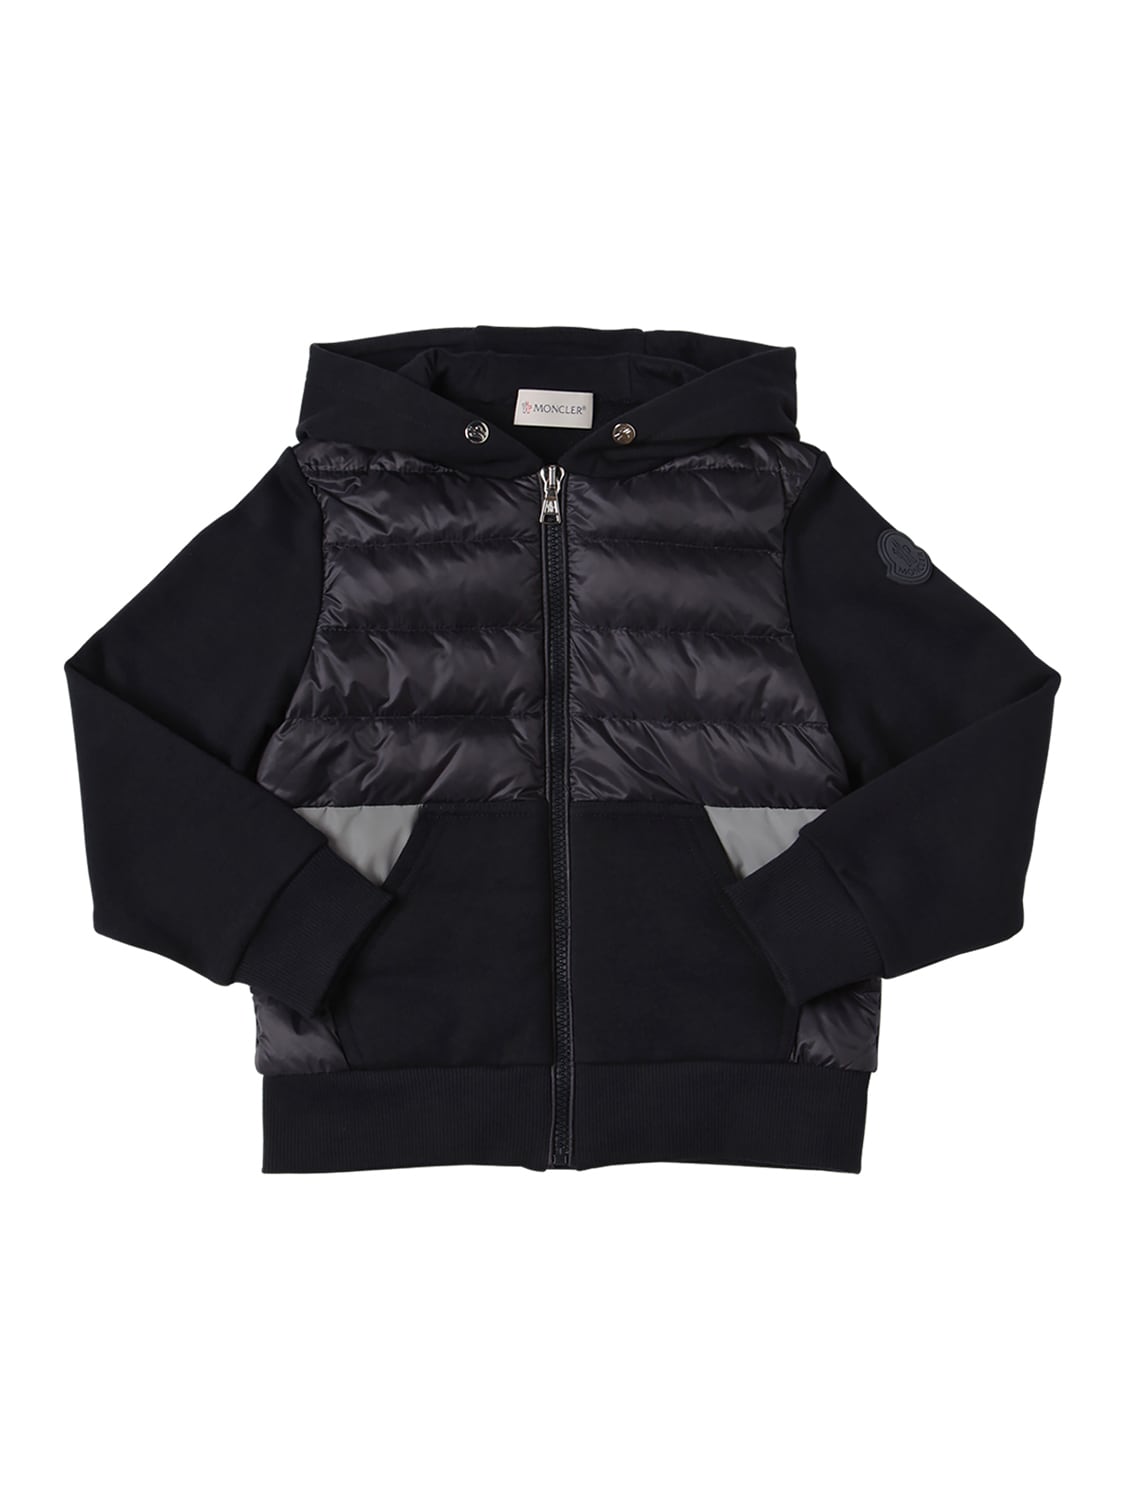 Moncler Kids' Hooded Nylon & Cotton Jacket In Navy